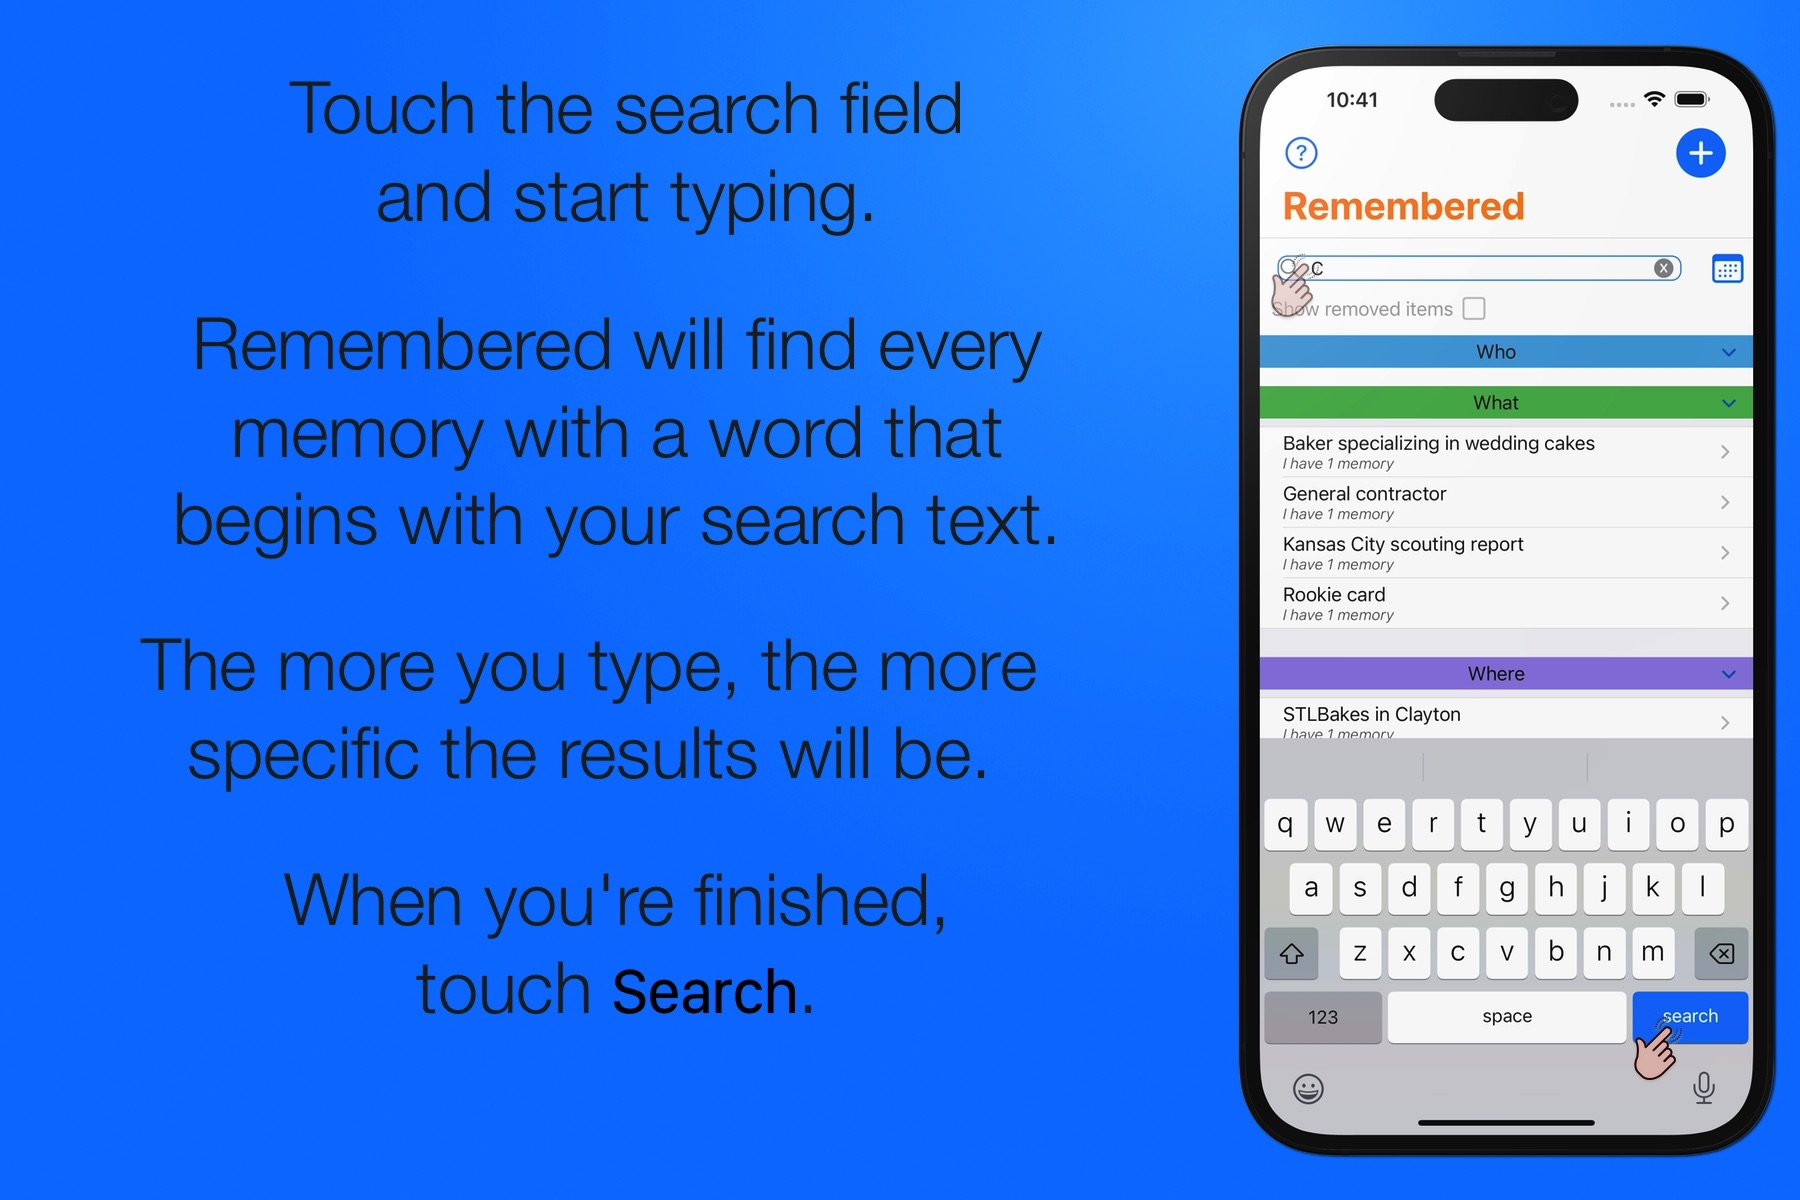 Touch the search field and start typing, then touch the Search button on your keyboard.